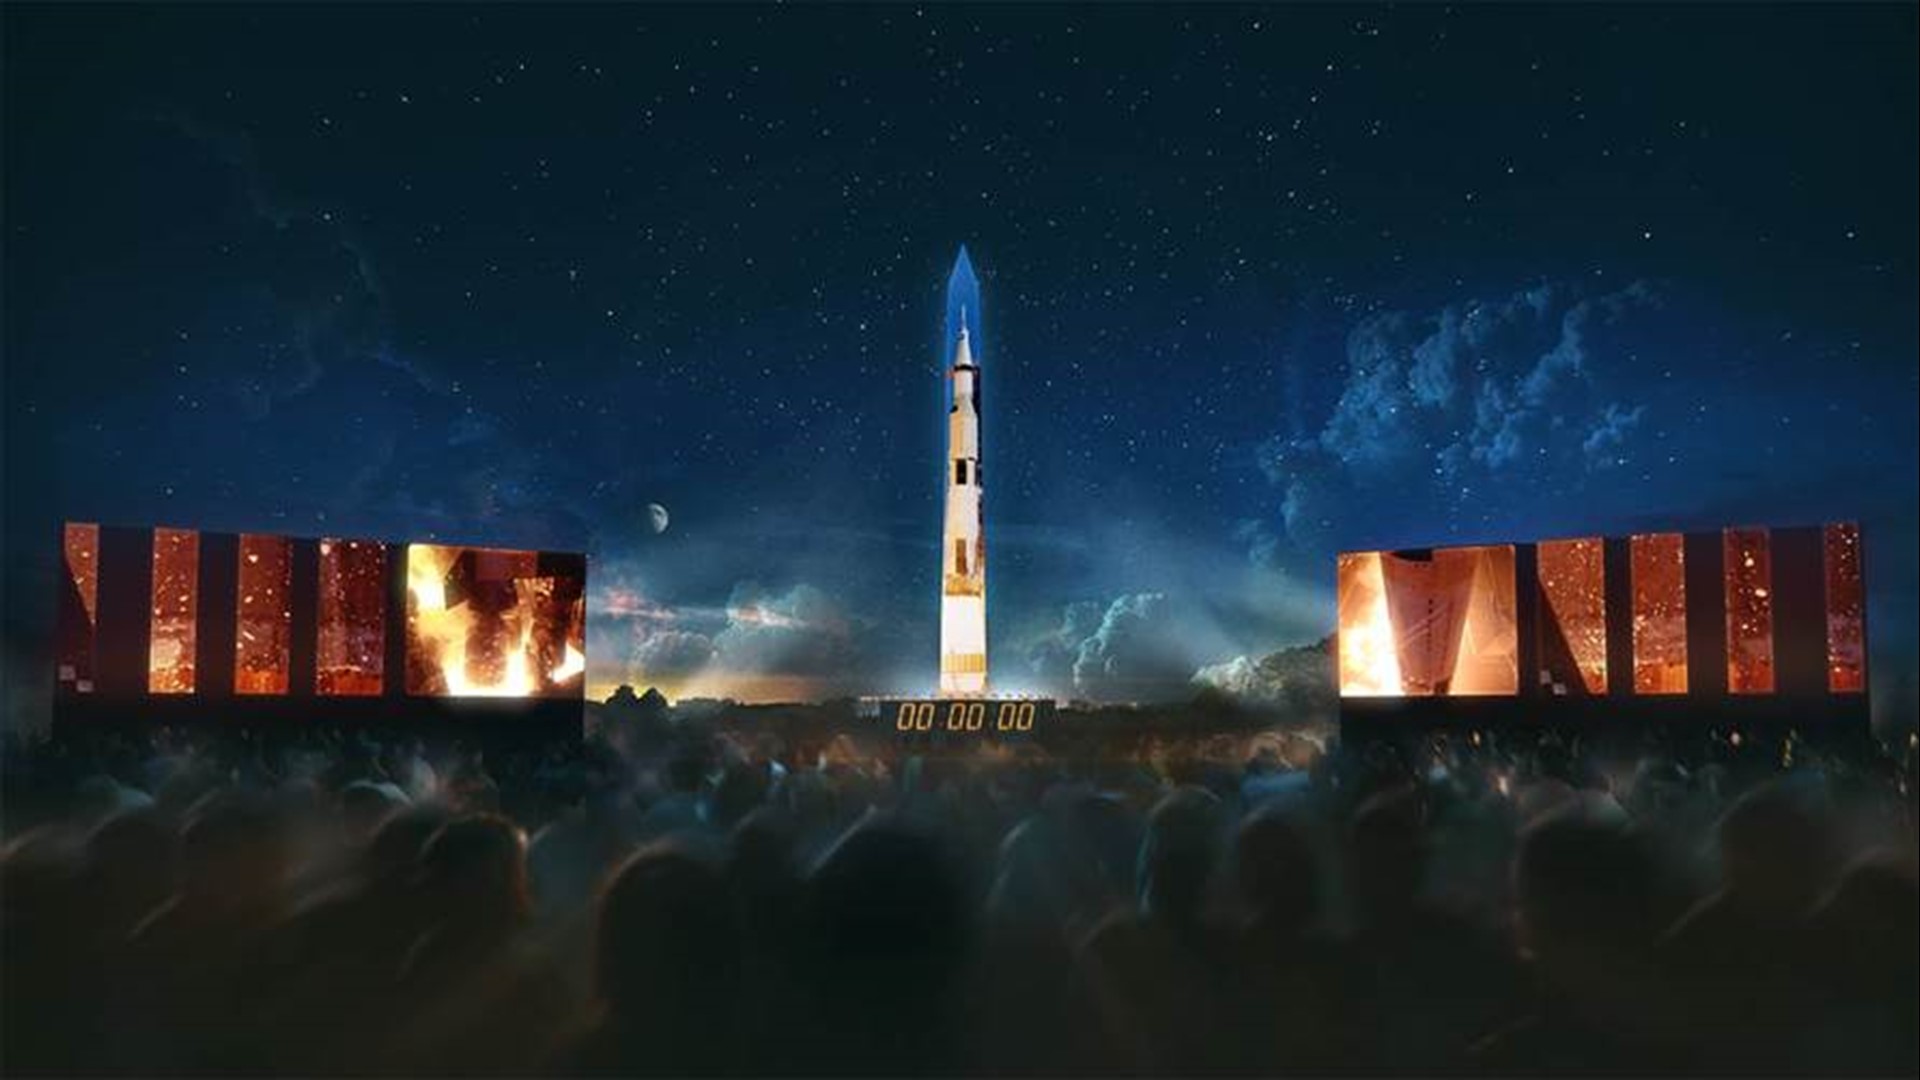 To celebrate the 50th anniversary of Apollo 11, the National Air and Space Museum is projecting a full-size 363-foot Saturn V rocket on the Washington Monument during the evening hours this week, starting at 9:30 p.m. on Tuesday.